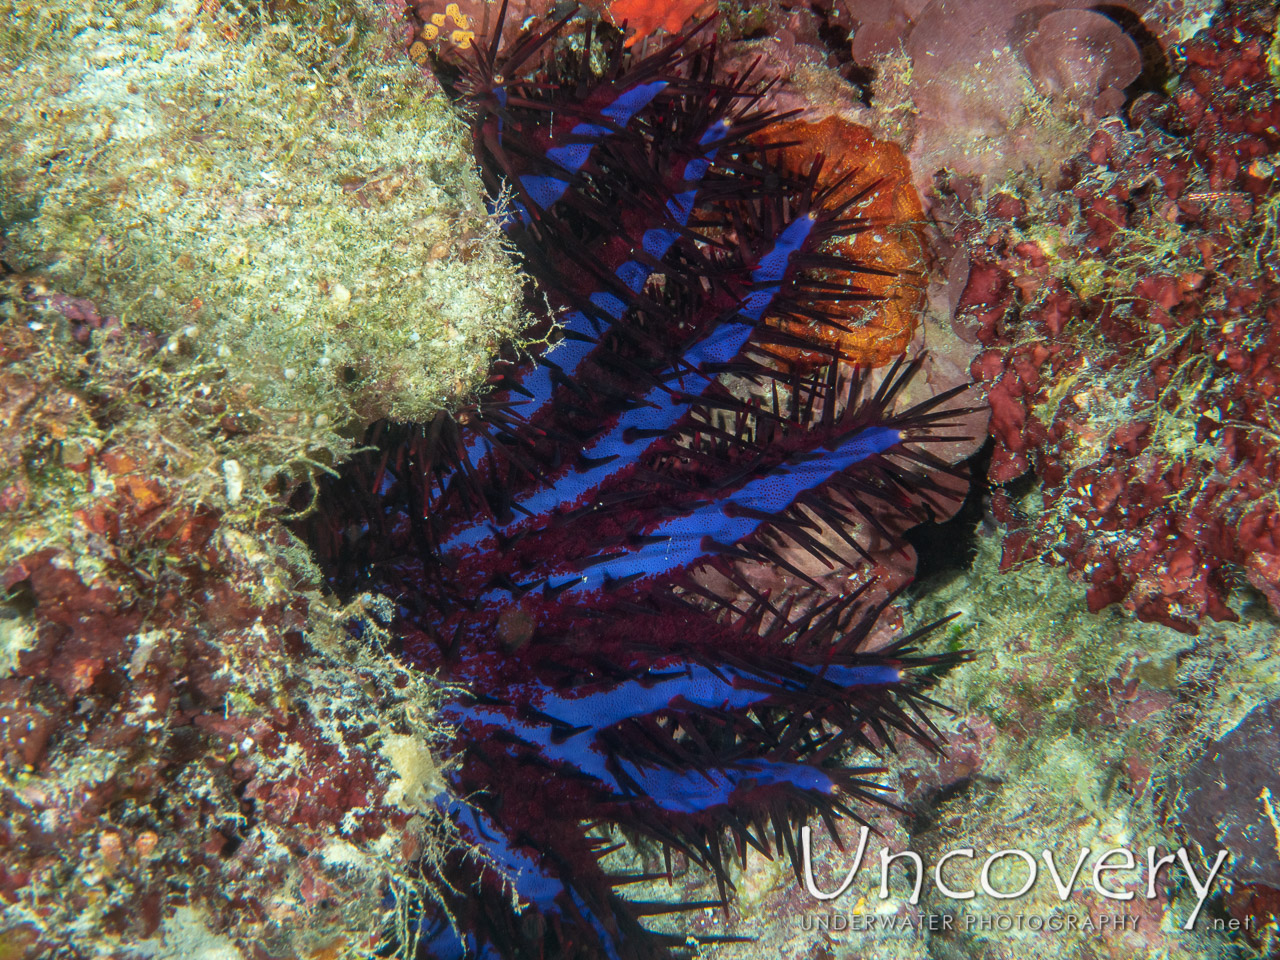 Crown Of Thorns Sea Star (acanthaster Planci), photo taken in Maldives, Male Atoll, South Male Atoll, Khukulhu Huraa